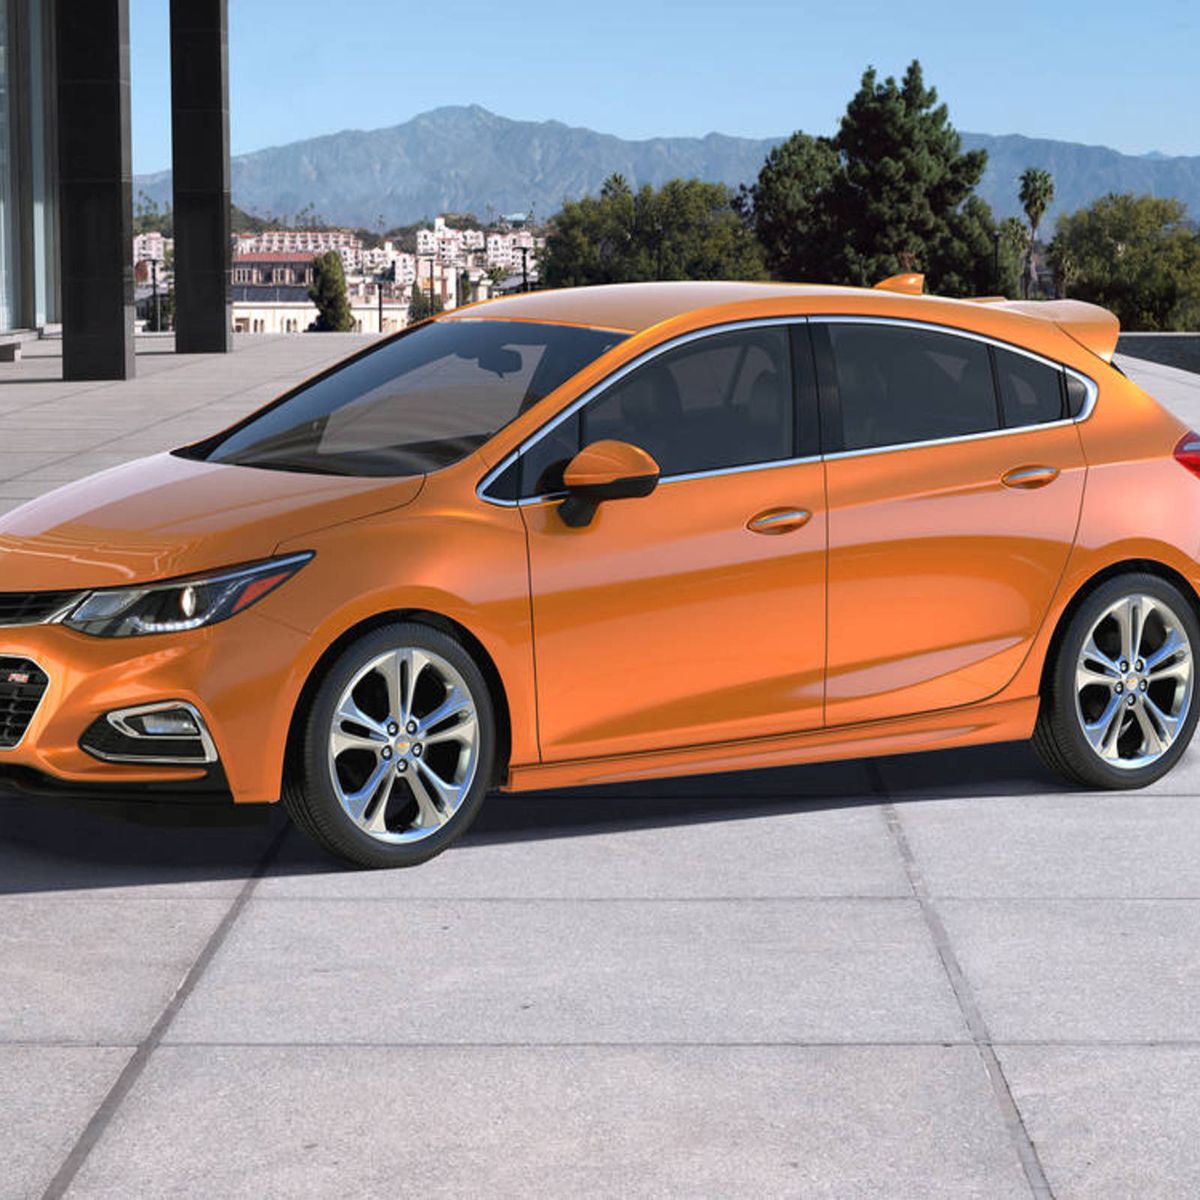 2017 Chevrolet Cruze Hatchback Premier review: A worthy small-car competitor